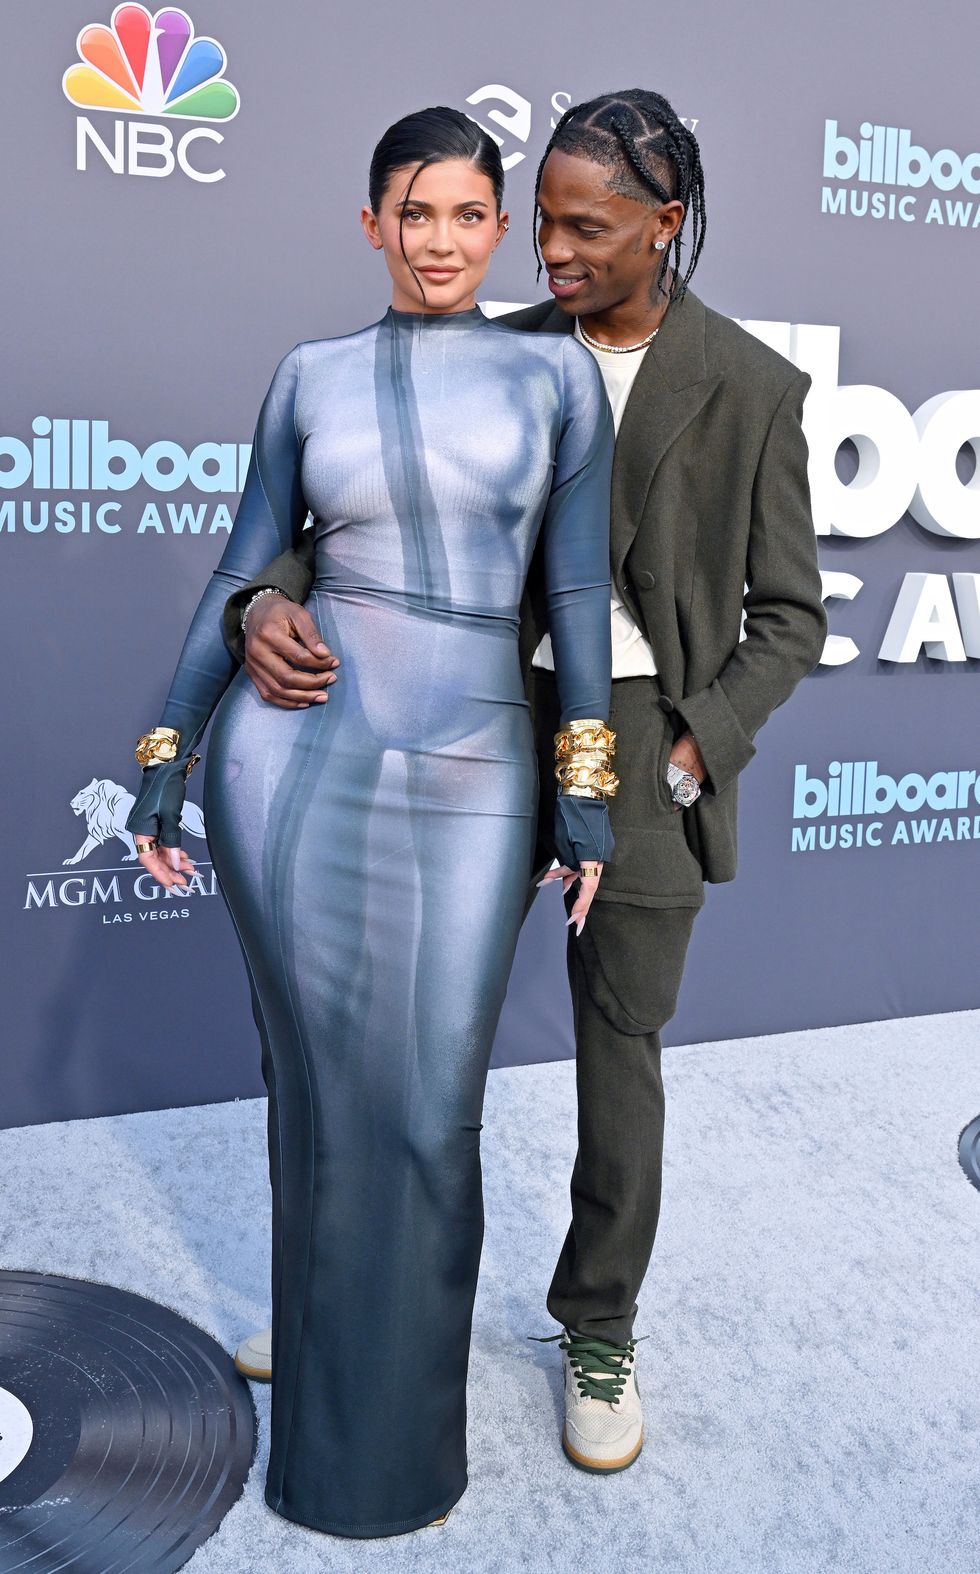 las vegas, nevada may 15 kylie jenner and travis scott attend the 2022 billboard music awards at mgm grand garden arena on may 15, 2022 in las vegas, nevada photo by axellebauer griffinfilmmagic